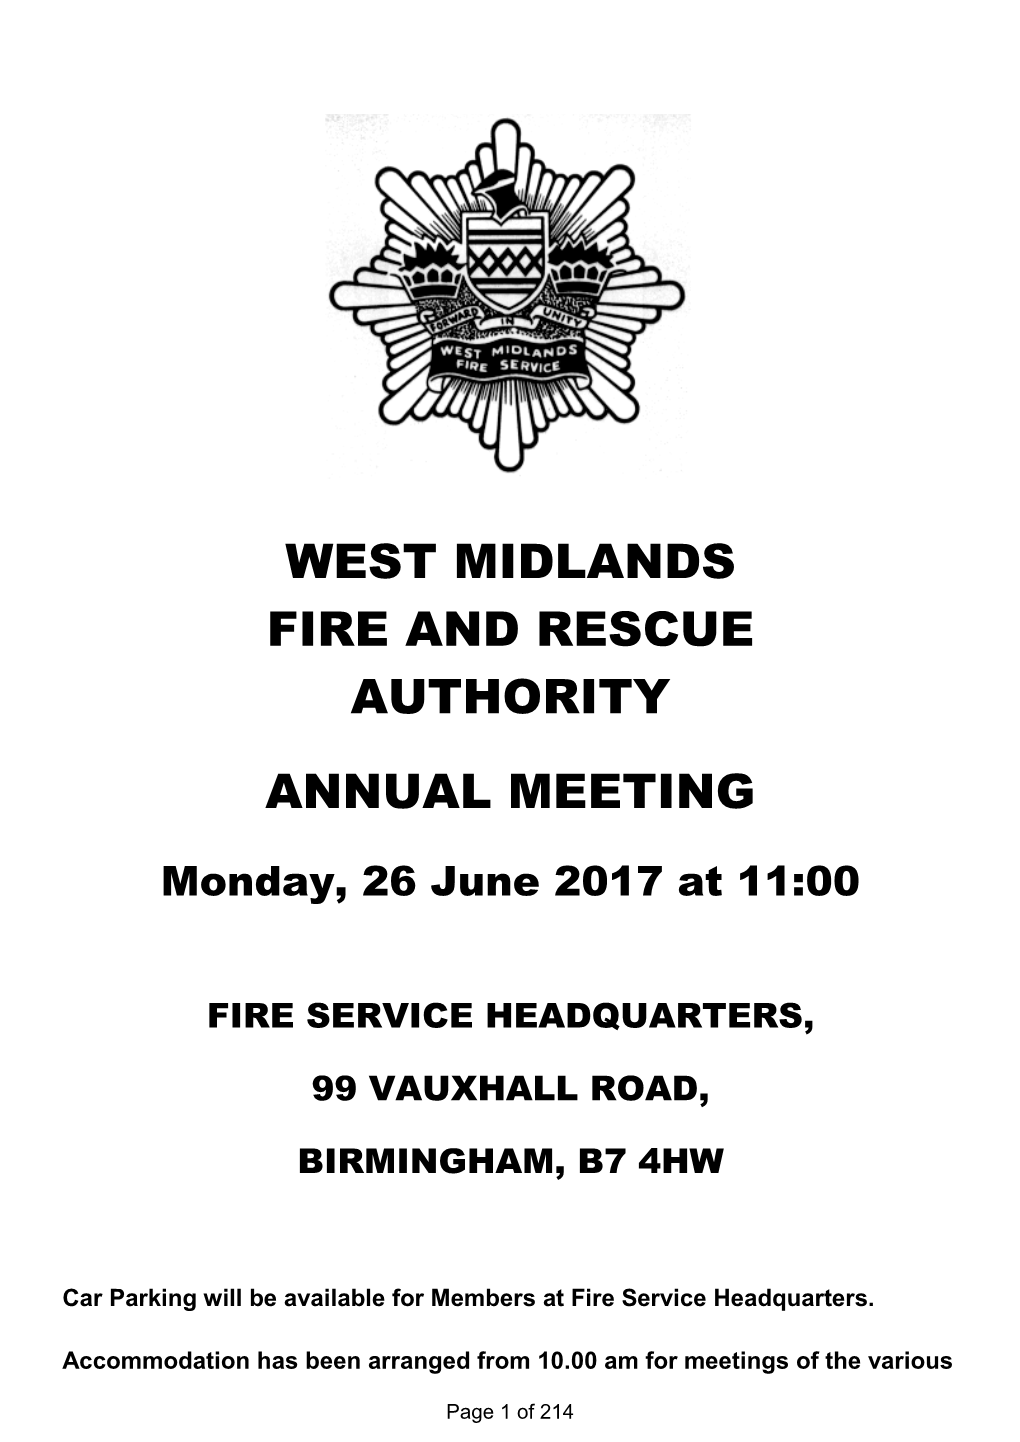 West Midlands Fire and Rescue Authority Annual Meeting